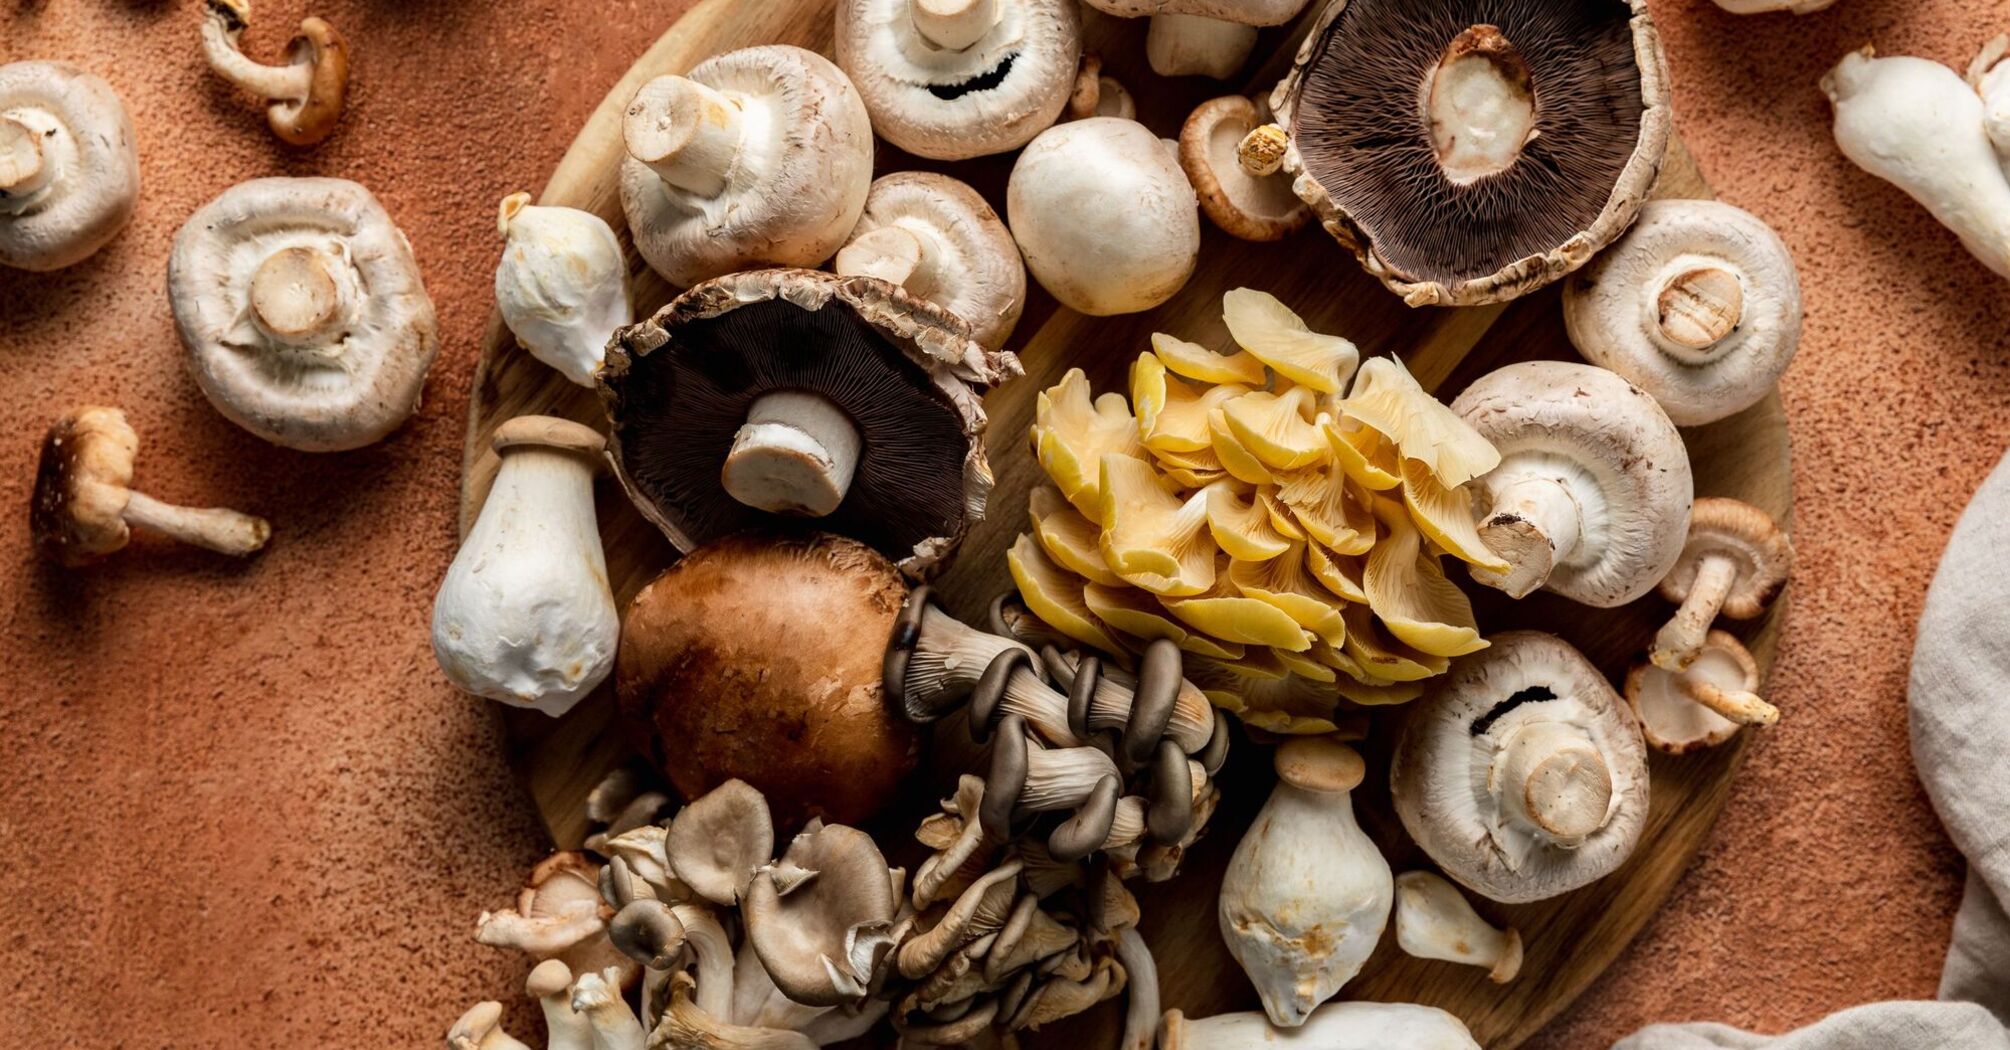 How to properly clean different types of mushrooms